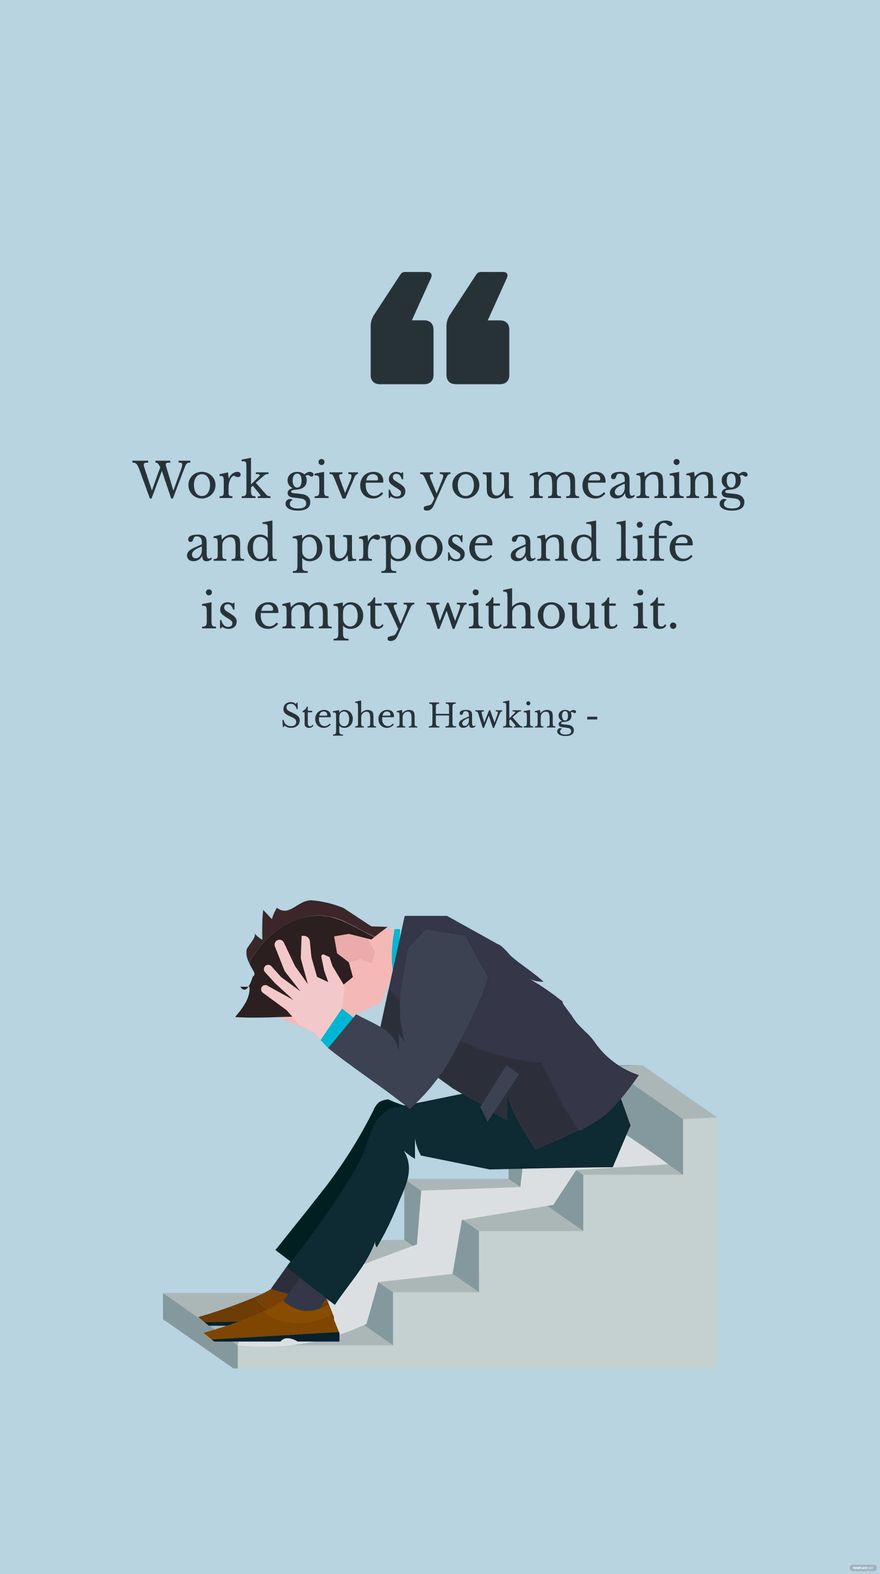 Stephen Hawking - Work gives you meaning and purpose and life is empty without it.